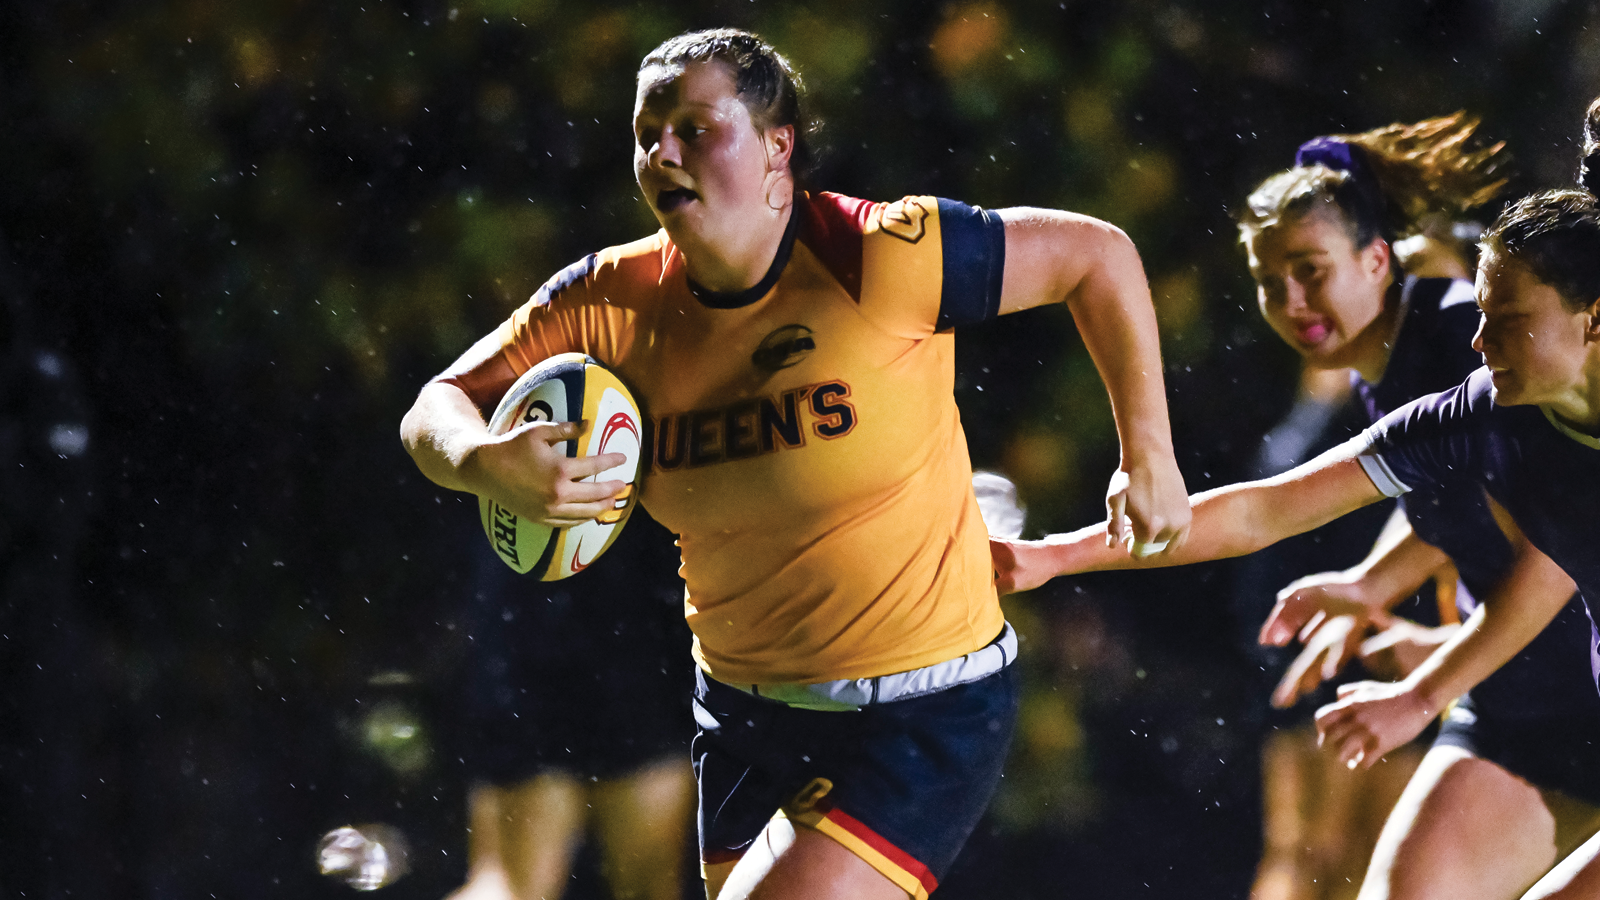 Queen's women's rugby player Maggie Banks running with the ball tucked in to her right arm as opposing players try to tackle her from behind